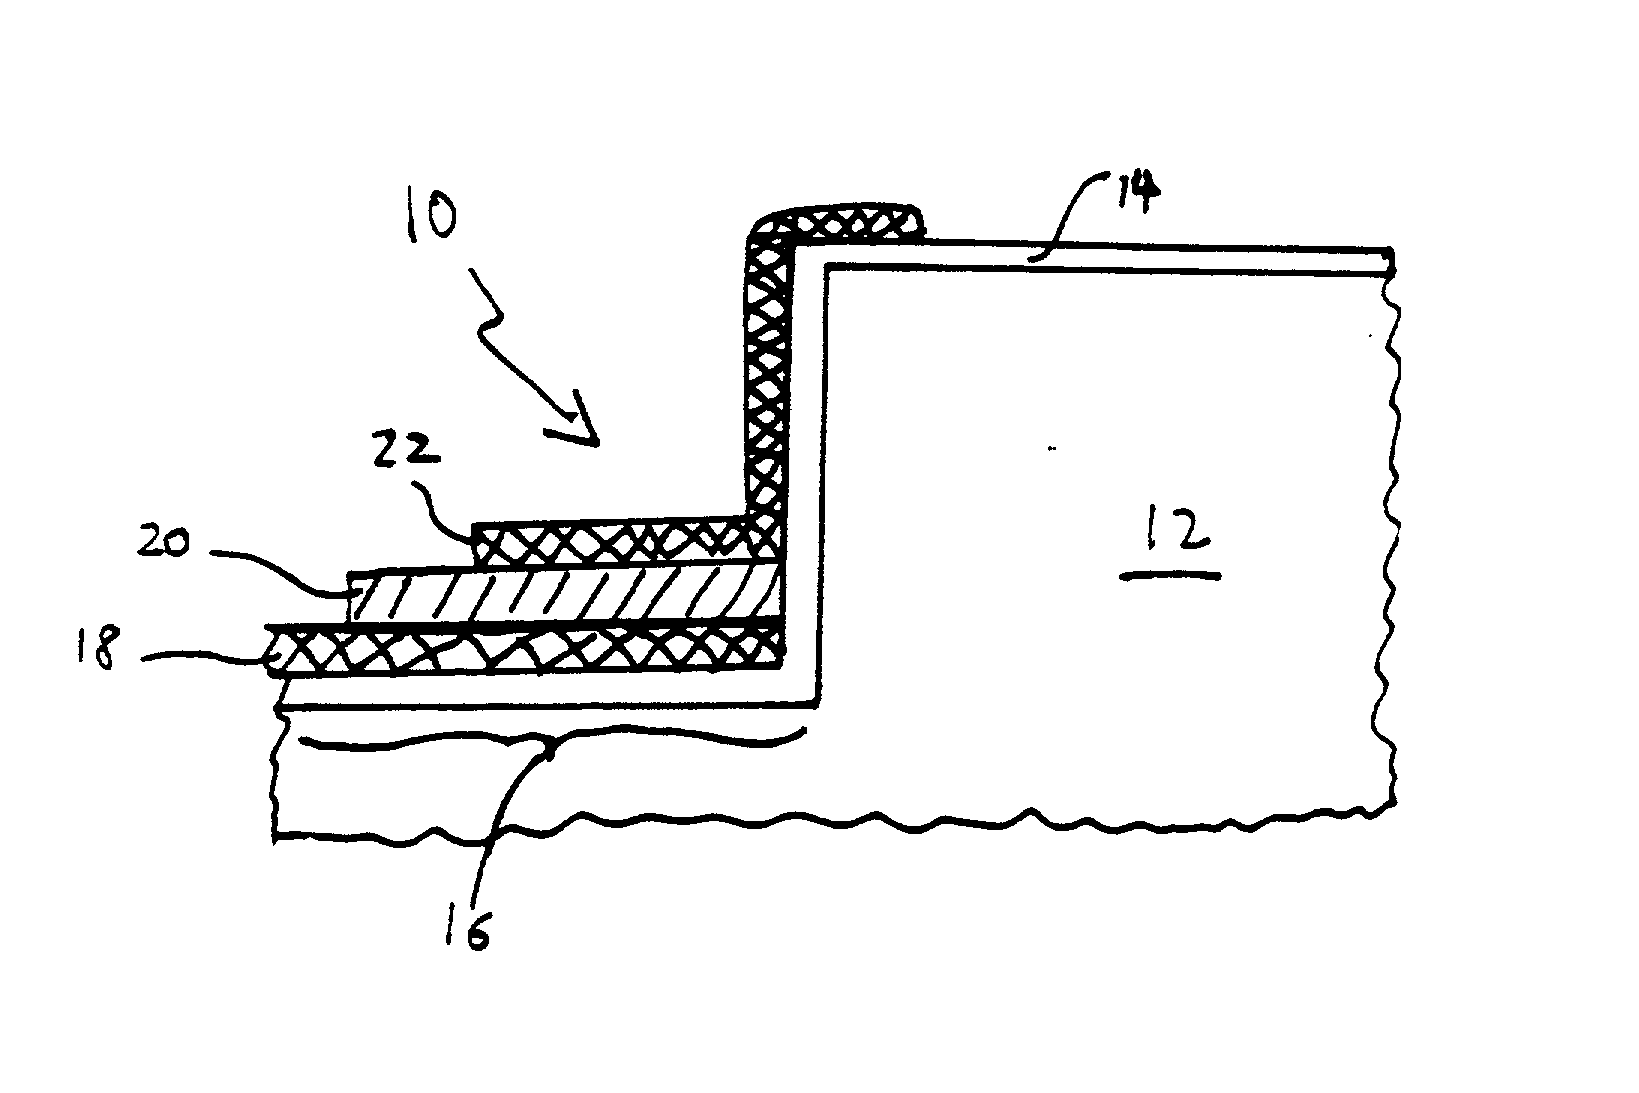 Organic semiconductor devices with short channels